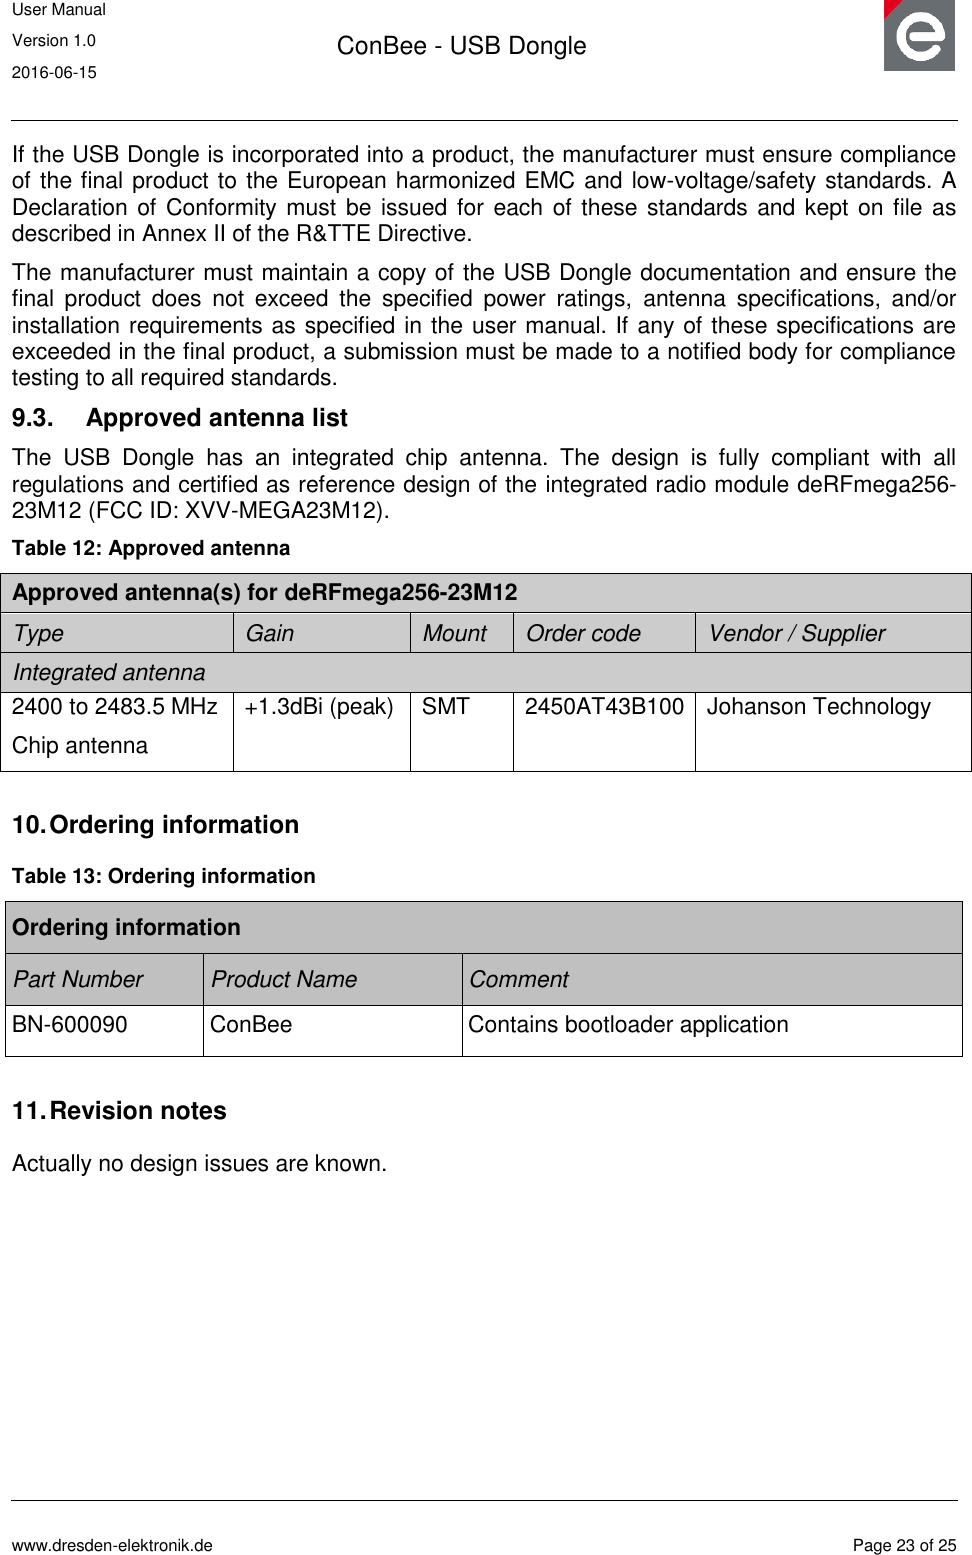 User Manual Version 1.0 2016-06-15  ConBee - USB Dongle      www.dresden-elektronik.de  Page 23 of 25  If the USB Dongle is incorporated into a product, the manufacturer must ensure compliance of the final product to the European harmonized EMC and low-voltage/safety standards. A Declaration of  Conformity must be issued for each of these standards and kept  on file as described in Annex II of the R&amp;TTE Directive. The manufacturer must maintain a copy of the USB Dongle documentation and ensure the final  product  does  not  exceed  the  specified  power  ratings,  antenna  specifications,  and/or installation requirements as specified in the user manual. If any of these specifications are exceeded in the final product, a submission must be made to a notified body for compliance testing to all required standards. 9.3.  Approved antenna list  The  USB  Dongle  has  an  integrated  chip  antenna.  The  design  is  fully  compliant  with  all regulations and certified as reference design of the integrated radio module deRFmega256-23M12 (FCC ID: XVV-MEGA23M12). Table 12: Approved antenna Approved antenna(s) for deRFmega256-23M12 Type Gain Mount Order code Vendor / Supplier Integrated antenna 2400 to 2483.5 MHz Chip antenna +1.3dBi (peak) SMT 2450AT43B100 Johanson Technology  10. Ordering information Table 13: Ordering information Ordering information Part Number Product Name Comment BN-600090 ConBee  Contains bootloader application  11. Revision notes Actually no design issues are known.  